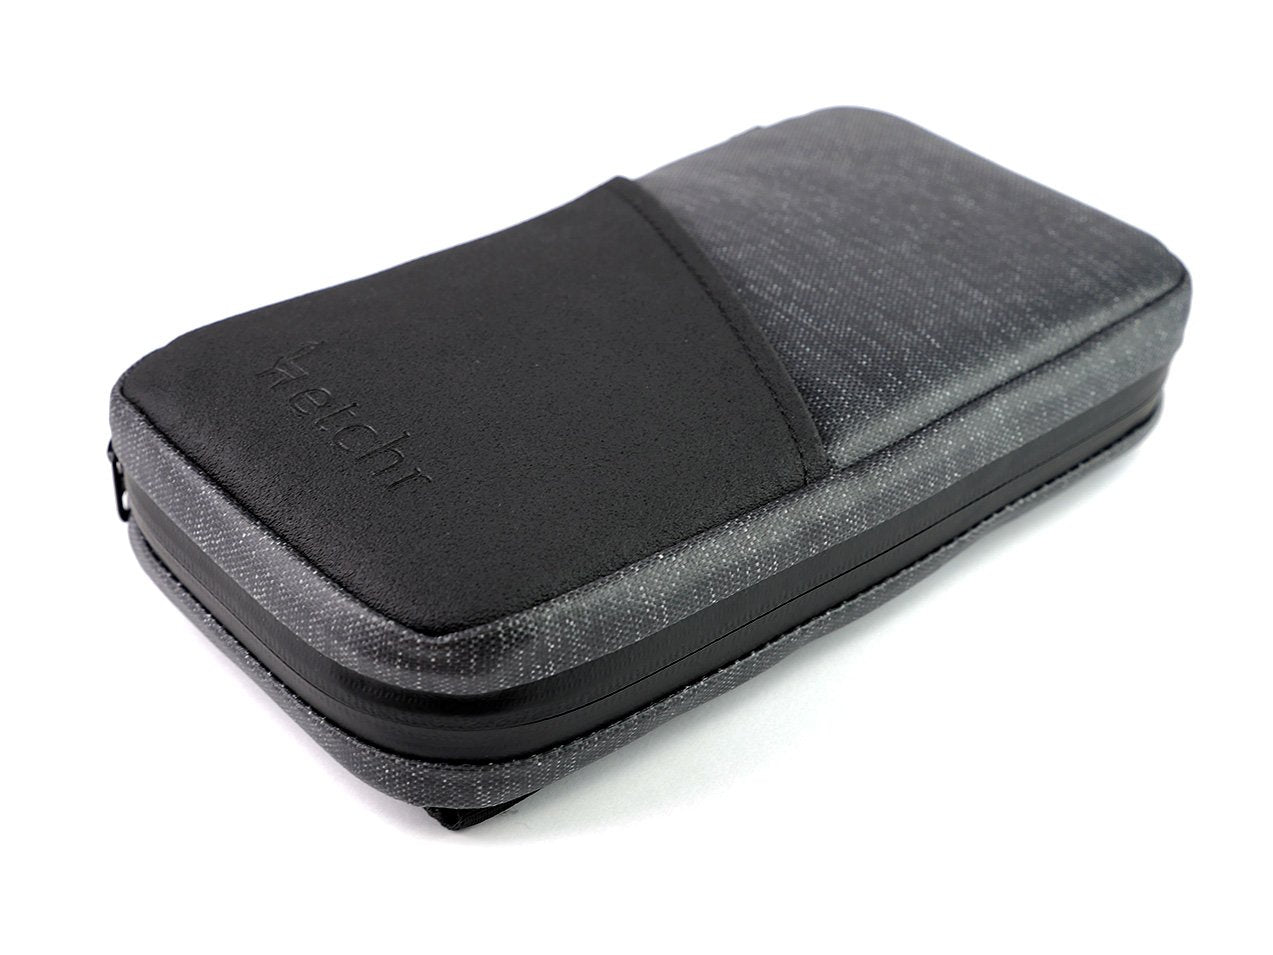 Etchr Field Case | Compact, high quality art carry case